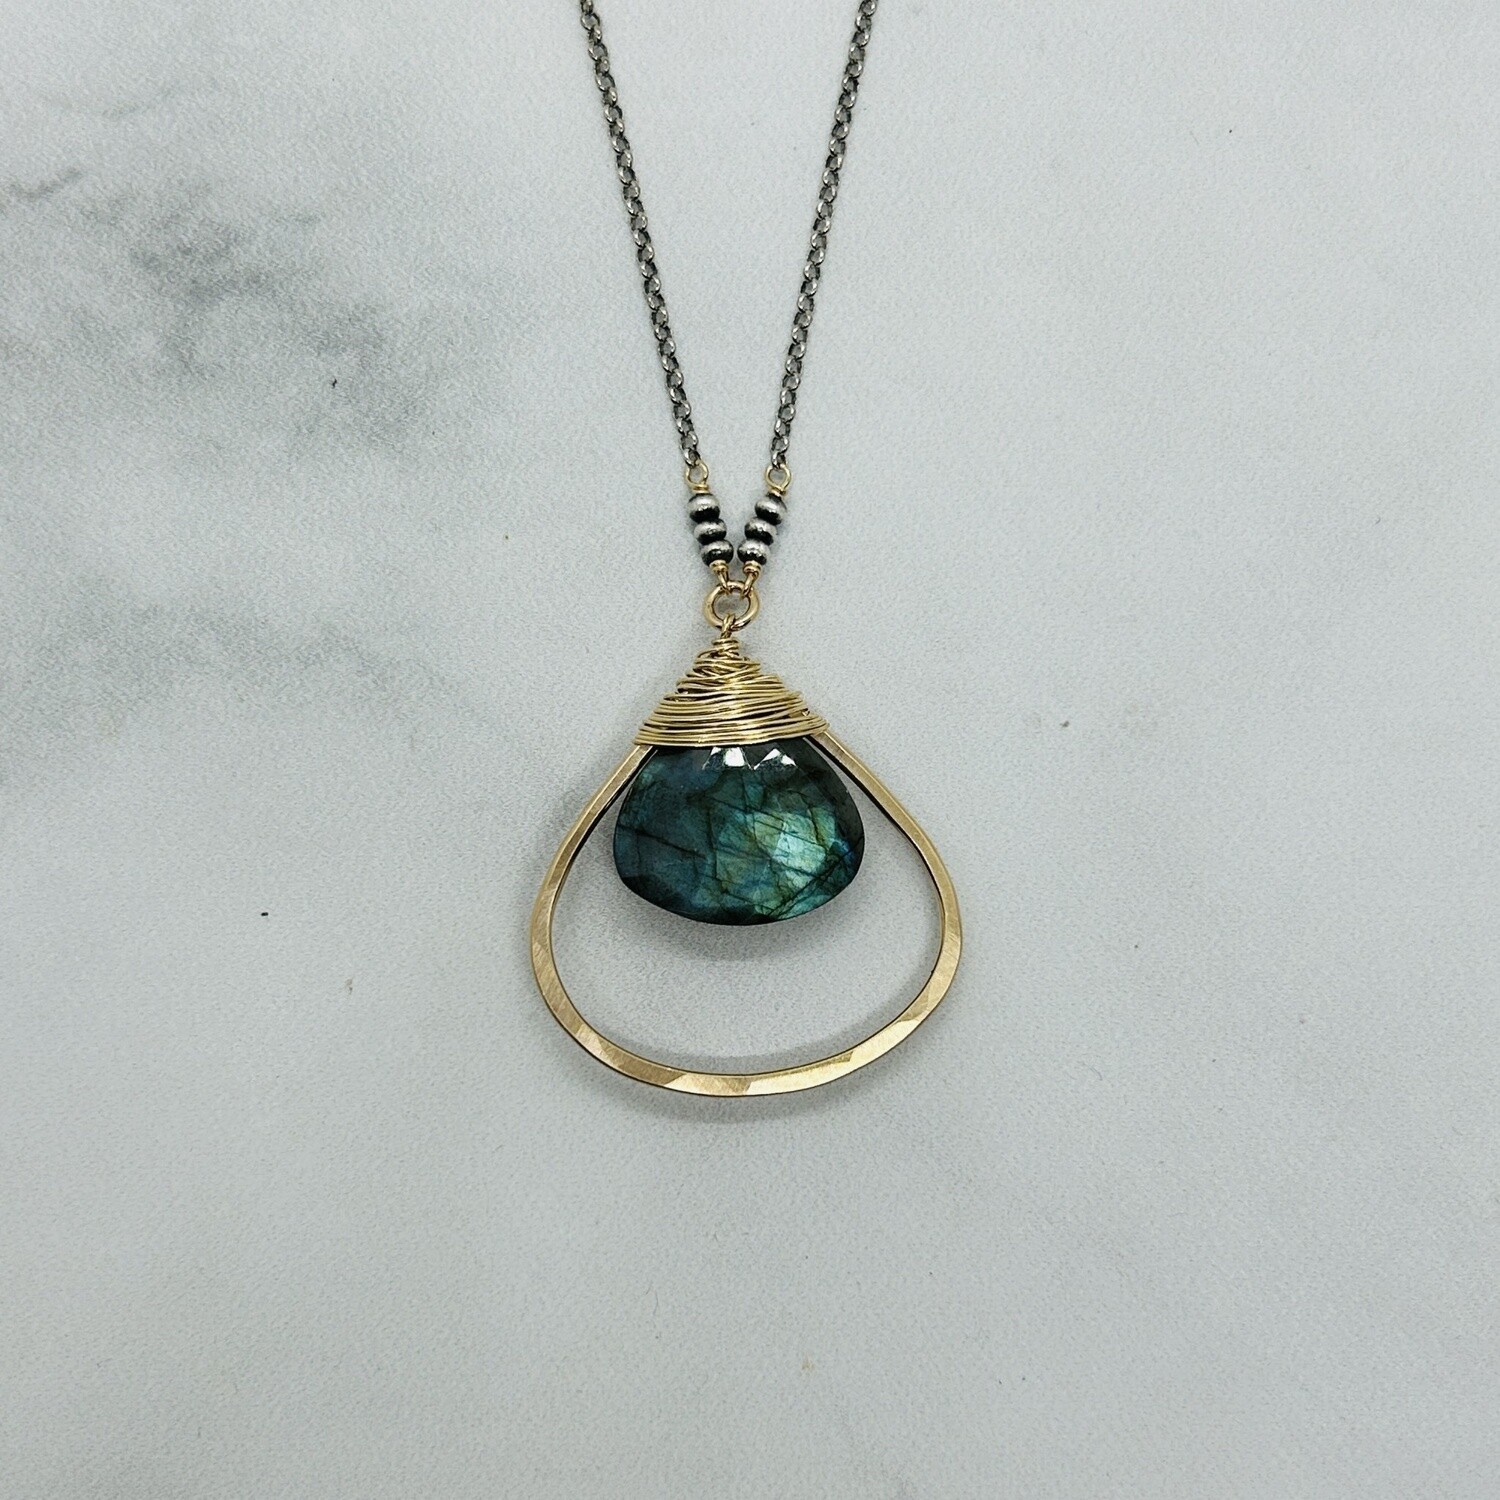 Handmade 14kt GF Teardrop w/Faceted Labradorite Pear on Oxizided SS Chain Necklace